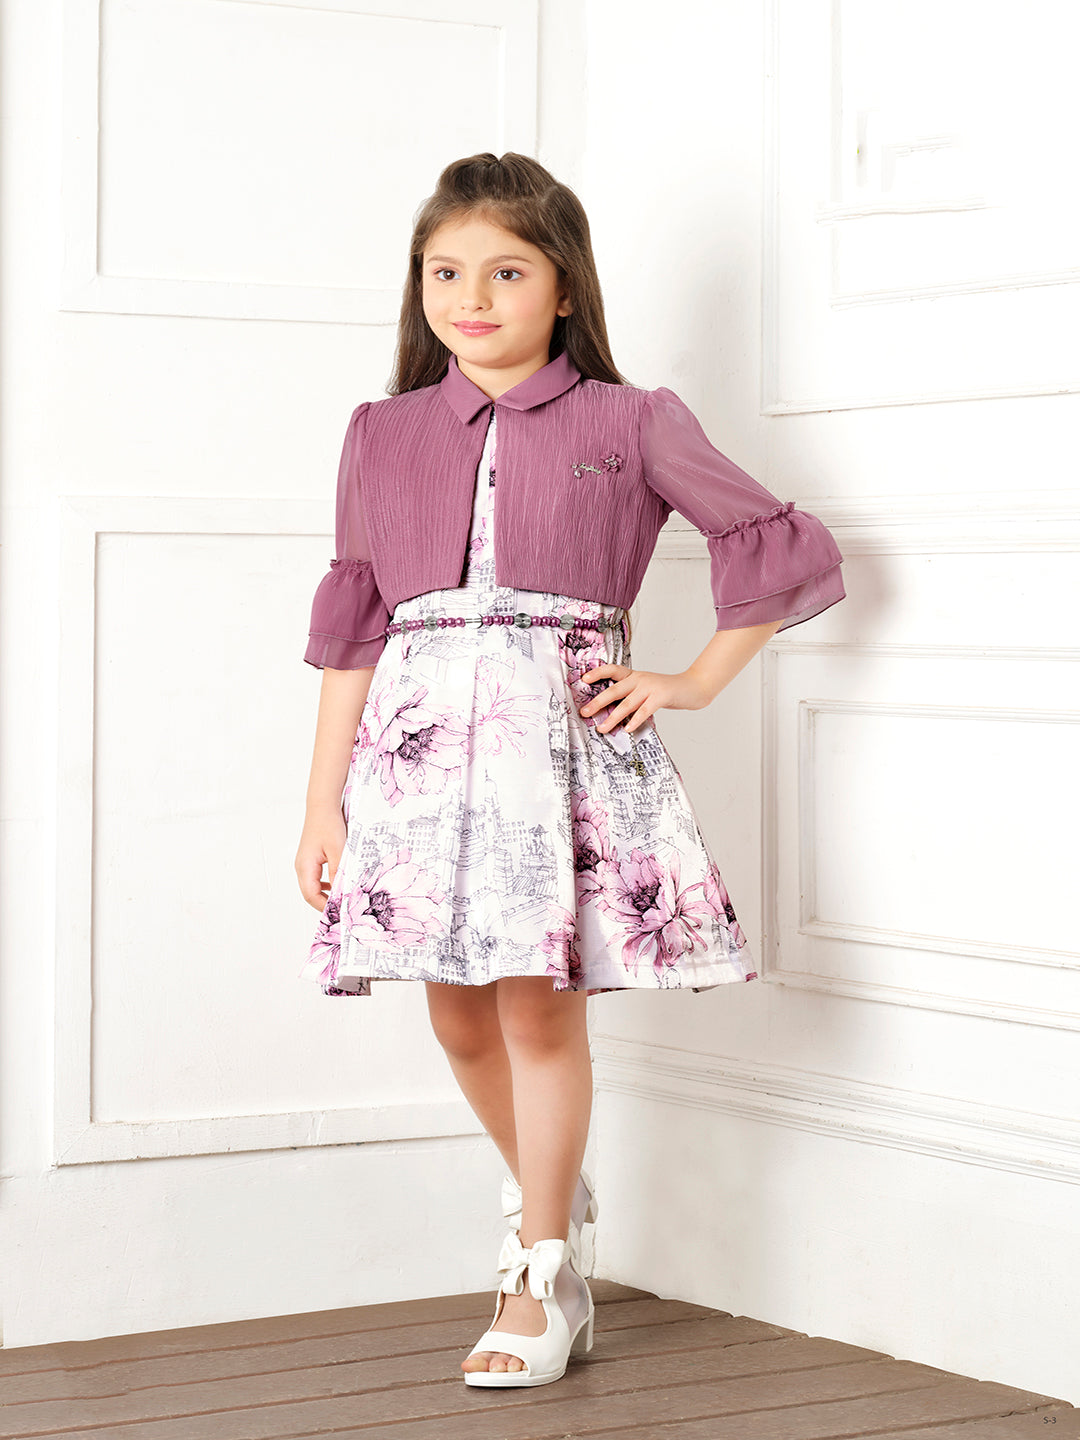 Tiny Baby Wine Colored Dress with Jacket - 2221 Wine